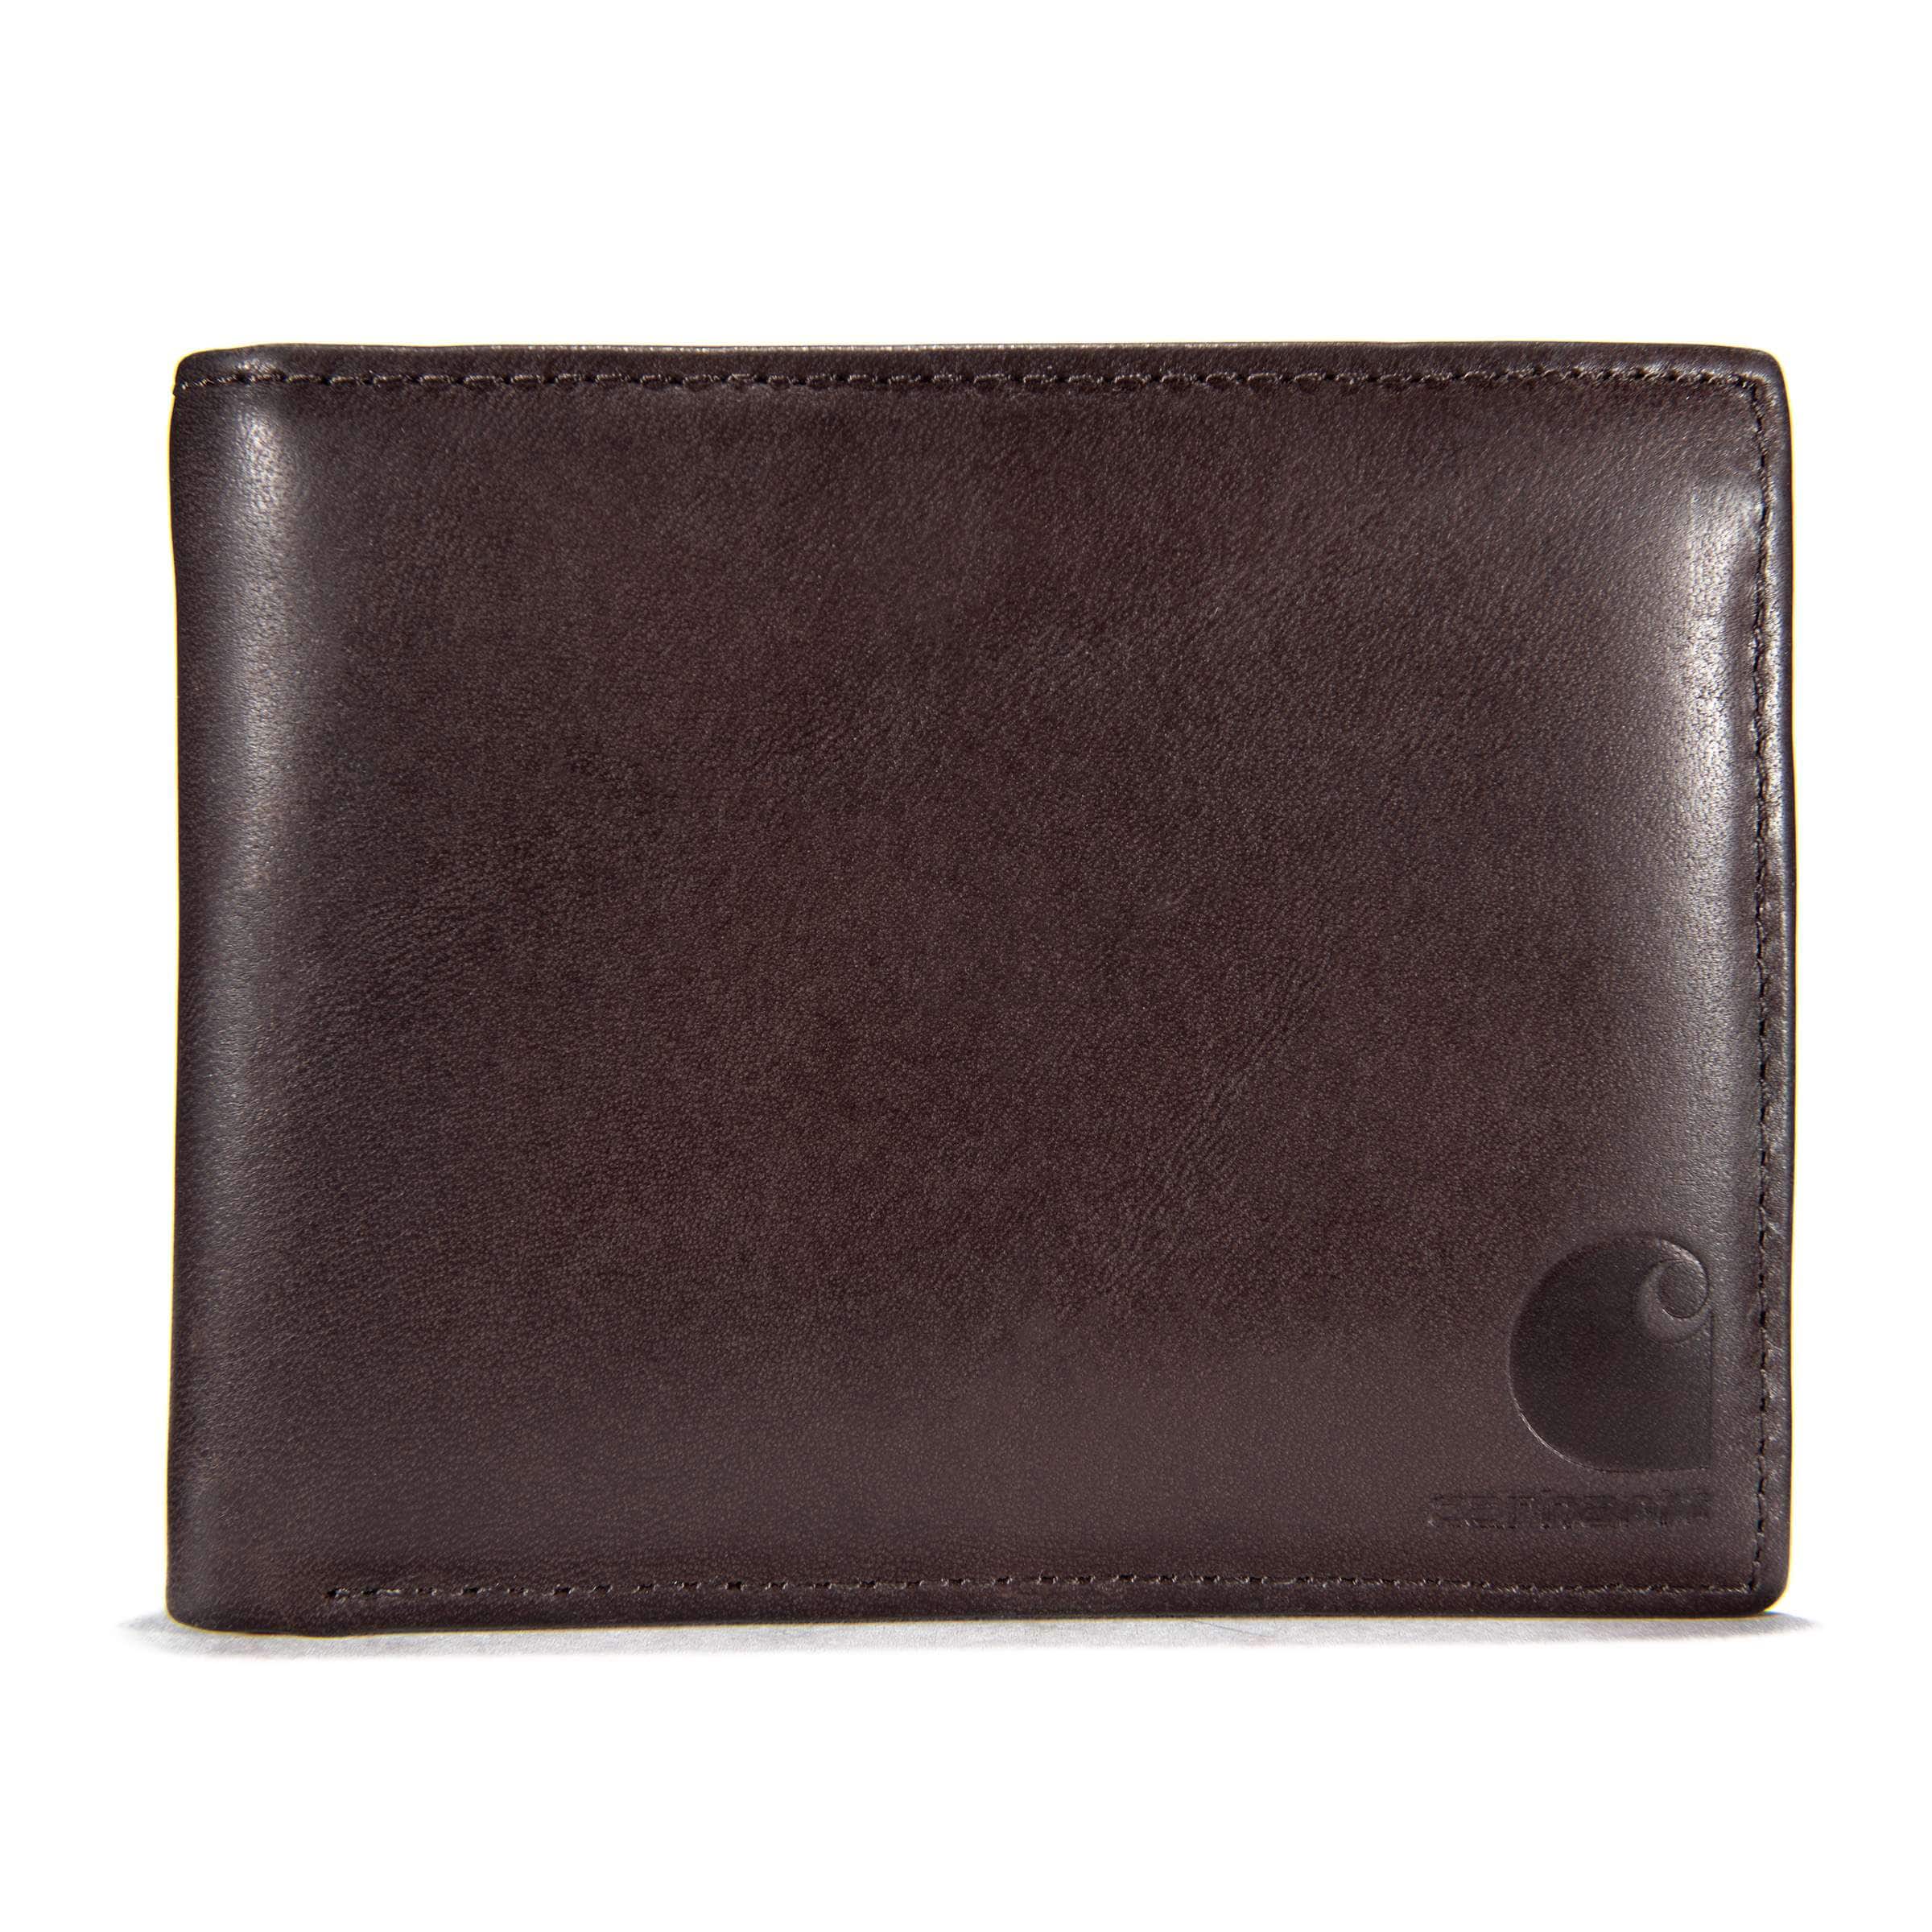 Police Badge Wallet All Leather Universal Fit-Saddle Brown